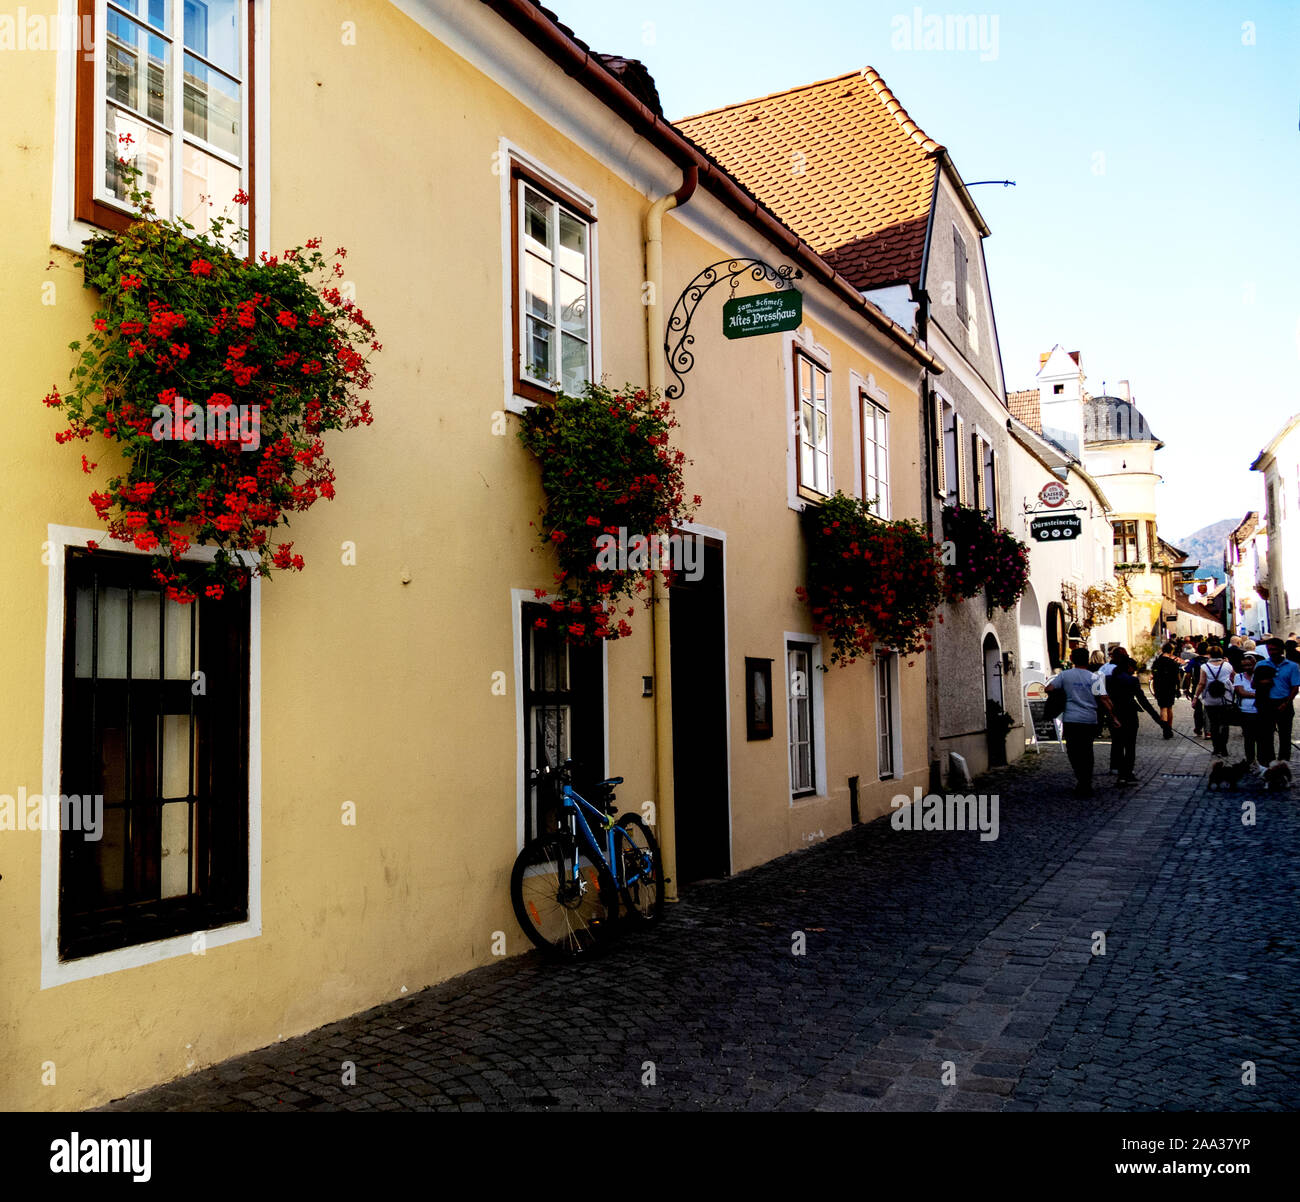 People shopping in the main street of Durnstein, Austria Stock Photo